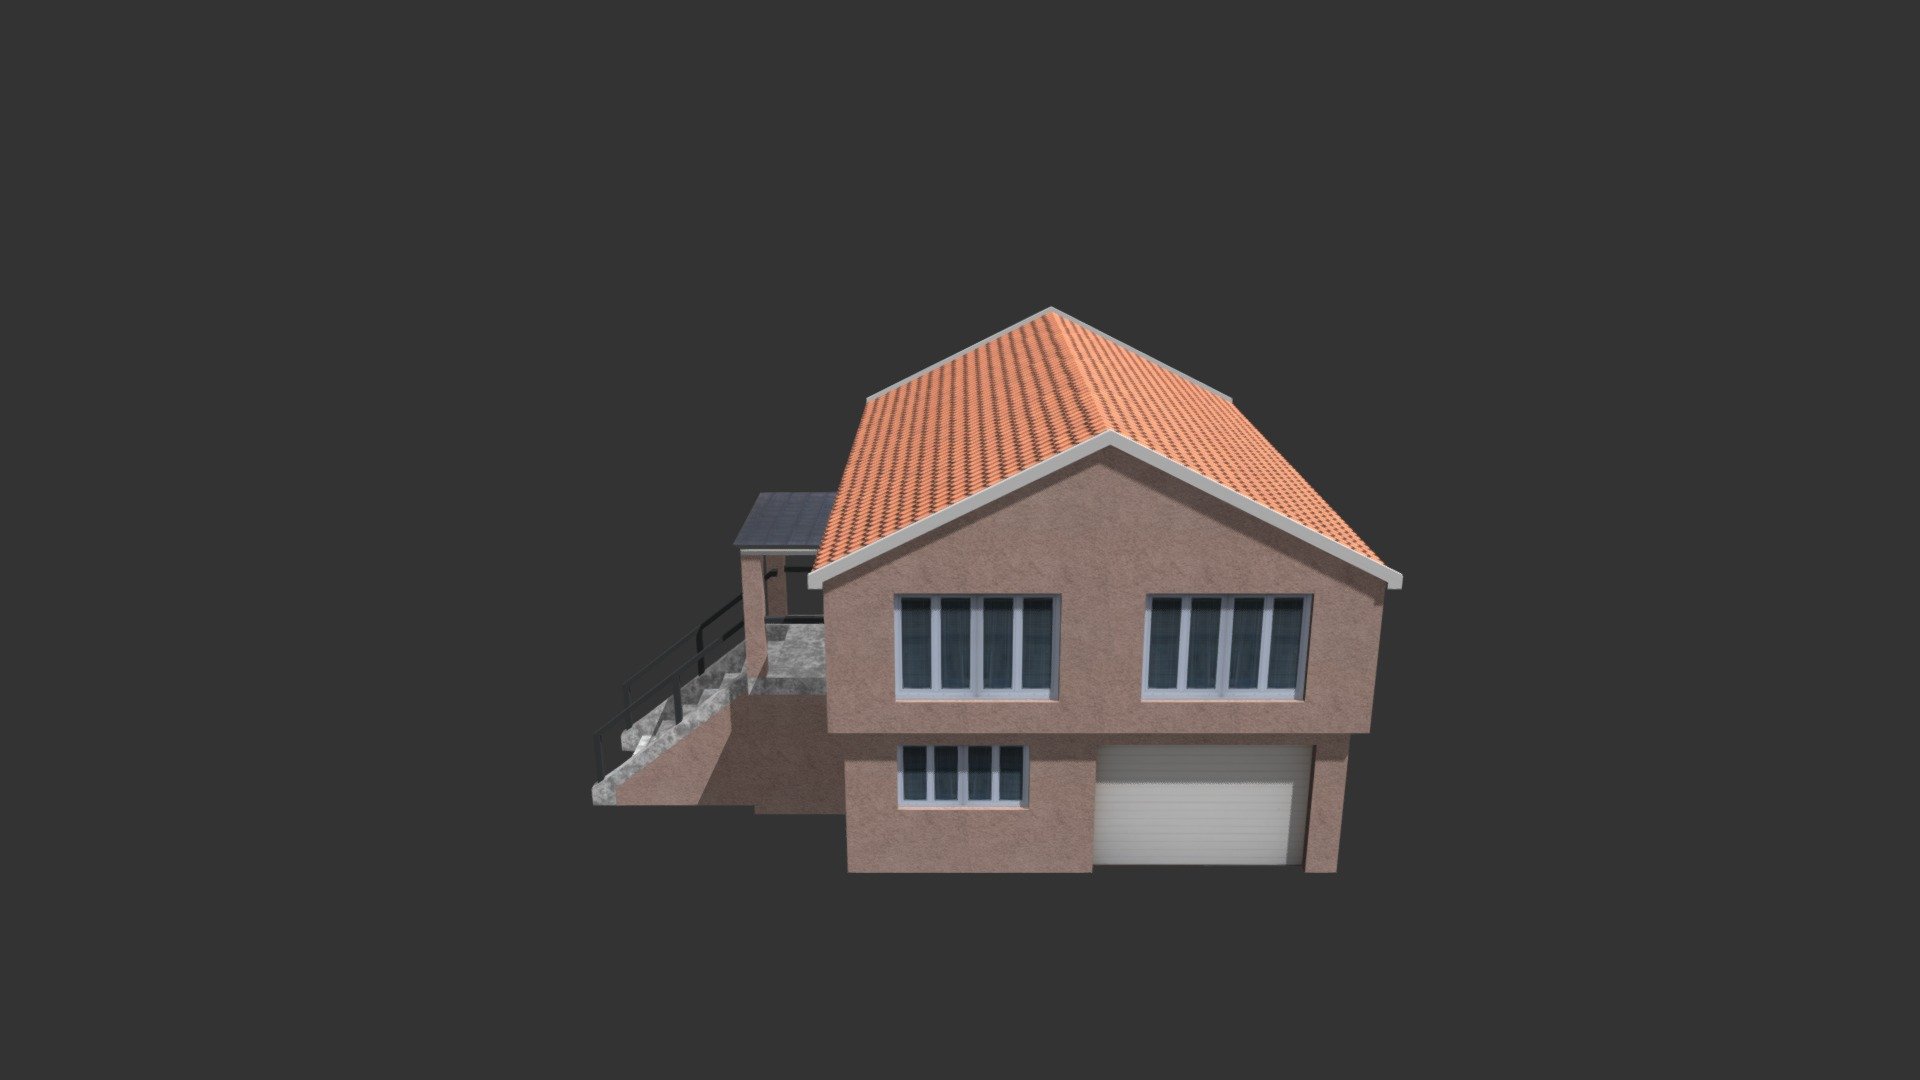 House 03

A low-poly 3d model ready for Virtual Reality (VR), Augmented Reality (AR), games and other real-time apps.

This model is based on a real life building and uses 774 triangles (422 polygons) and 4 materials.

Scaled to a default scale of 1 unit = 1 meter

This set comes with :

Model files in 3DS format files (.3ds) 
Model files in FBX format files (.fbx) 
Model files in OBJ format files (.obj &amp; .mtl) 

Textures : 
Diffuse Maps 
Normal Maps

All Textures are preloaded on the materials and prefabs so this prop is ready to be dropped in to any of your scenes.

Optimised for game engines but can also be used in any 3d package 3d model